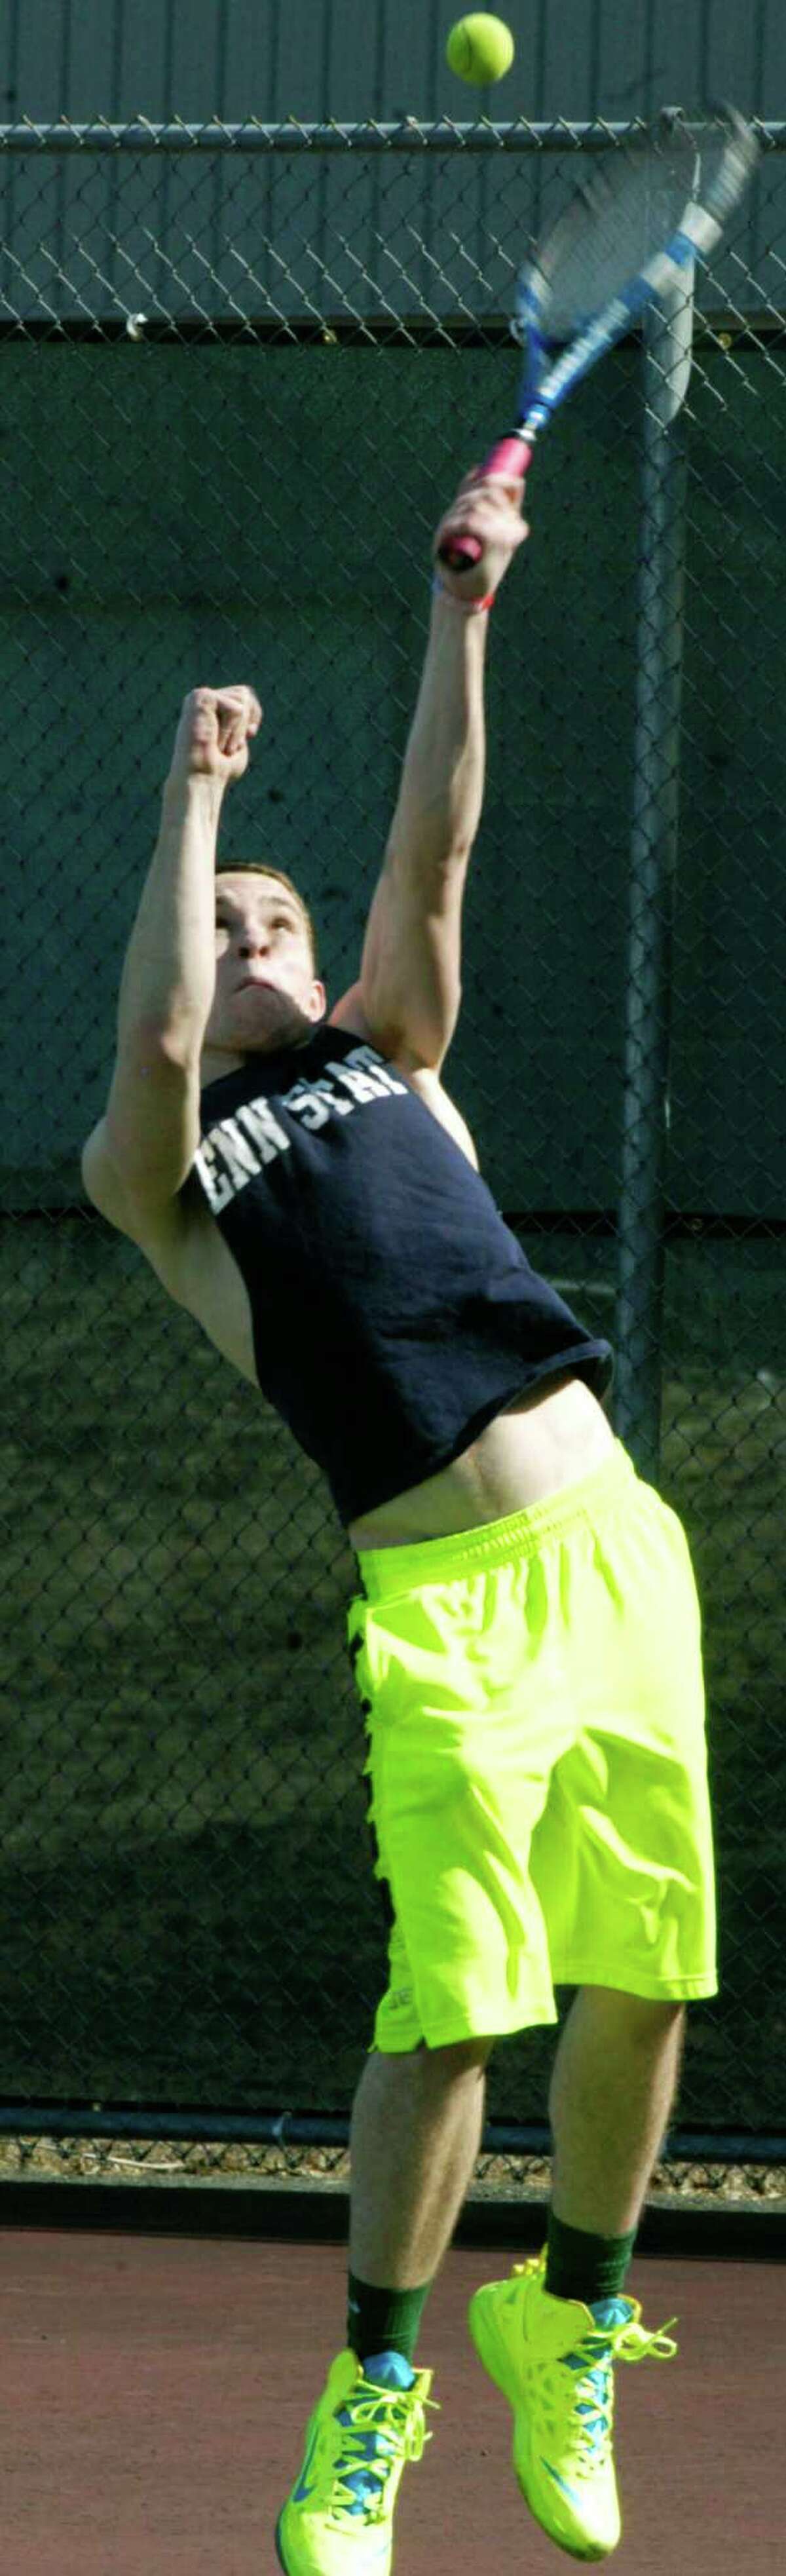 Nick Eherts of the Green Wave works on his serve for New Milford High School boys' tennis. April 2014